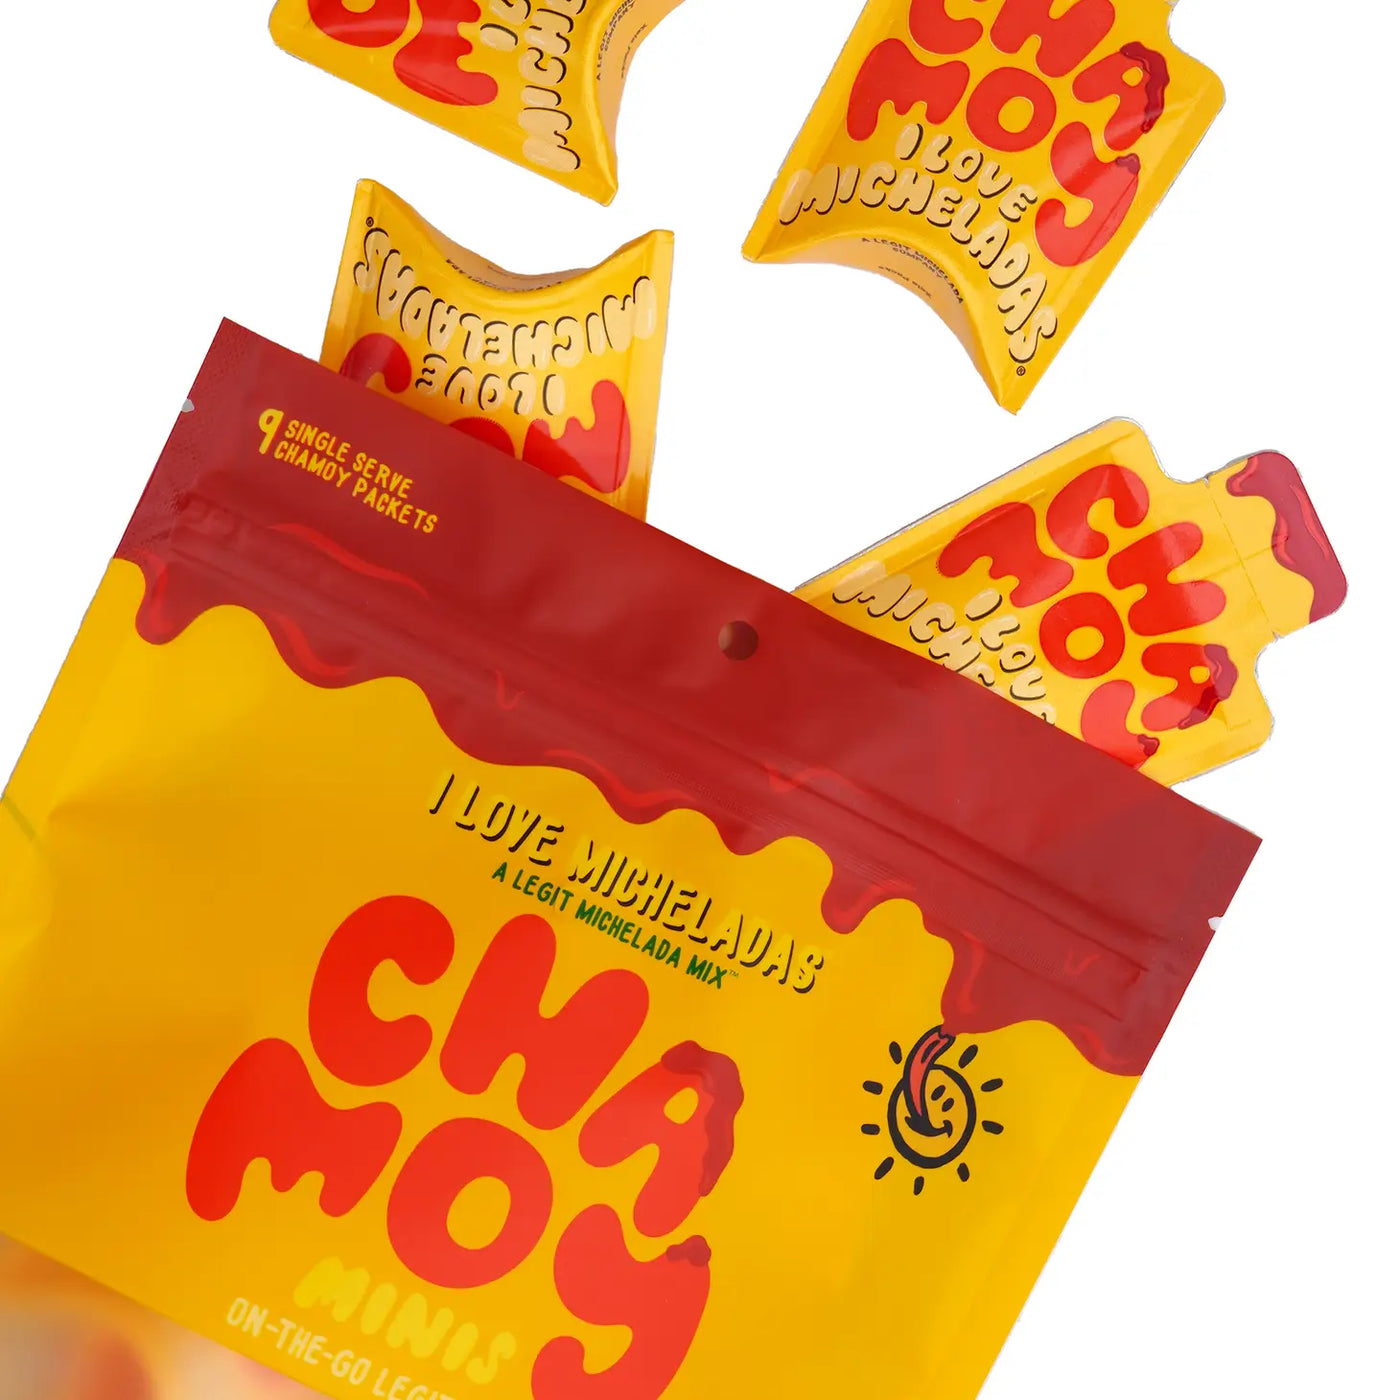 Opened back of Chamoy Minis with four to go packets spilling out of the bag. Features yellow and red branded packaging.